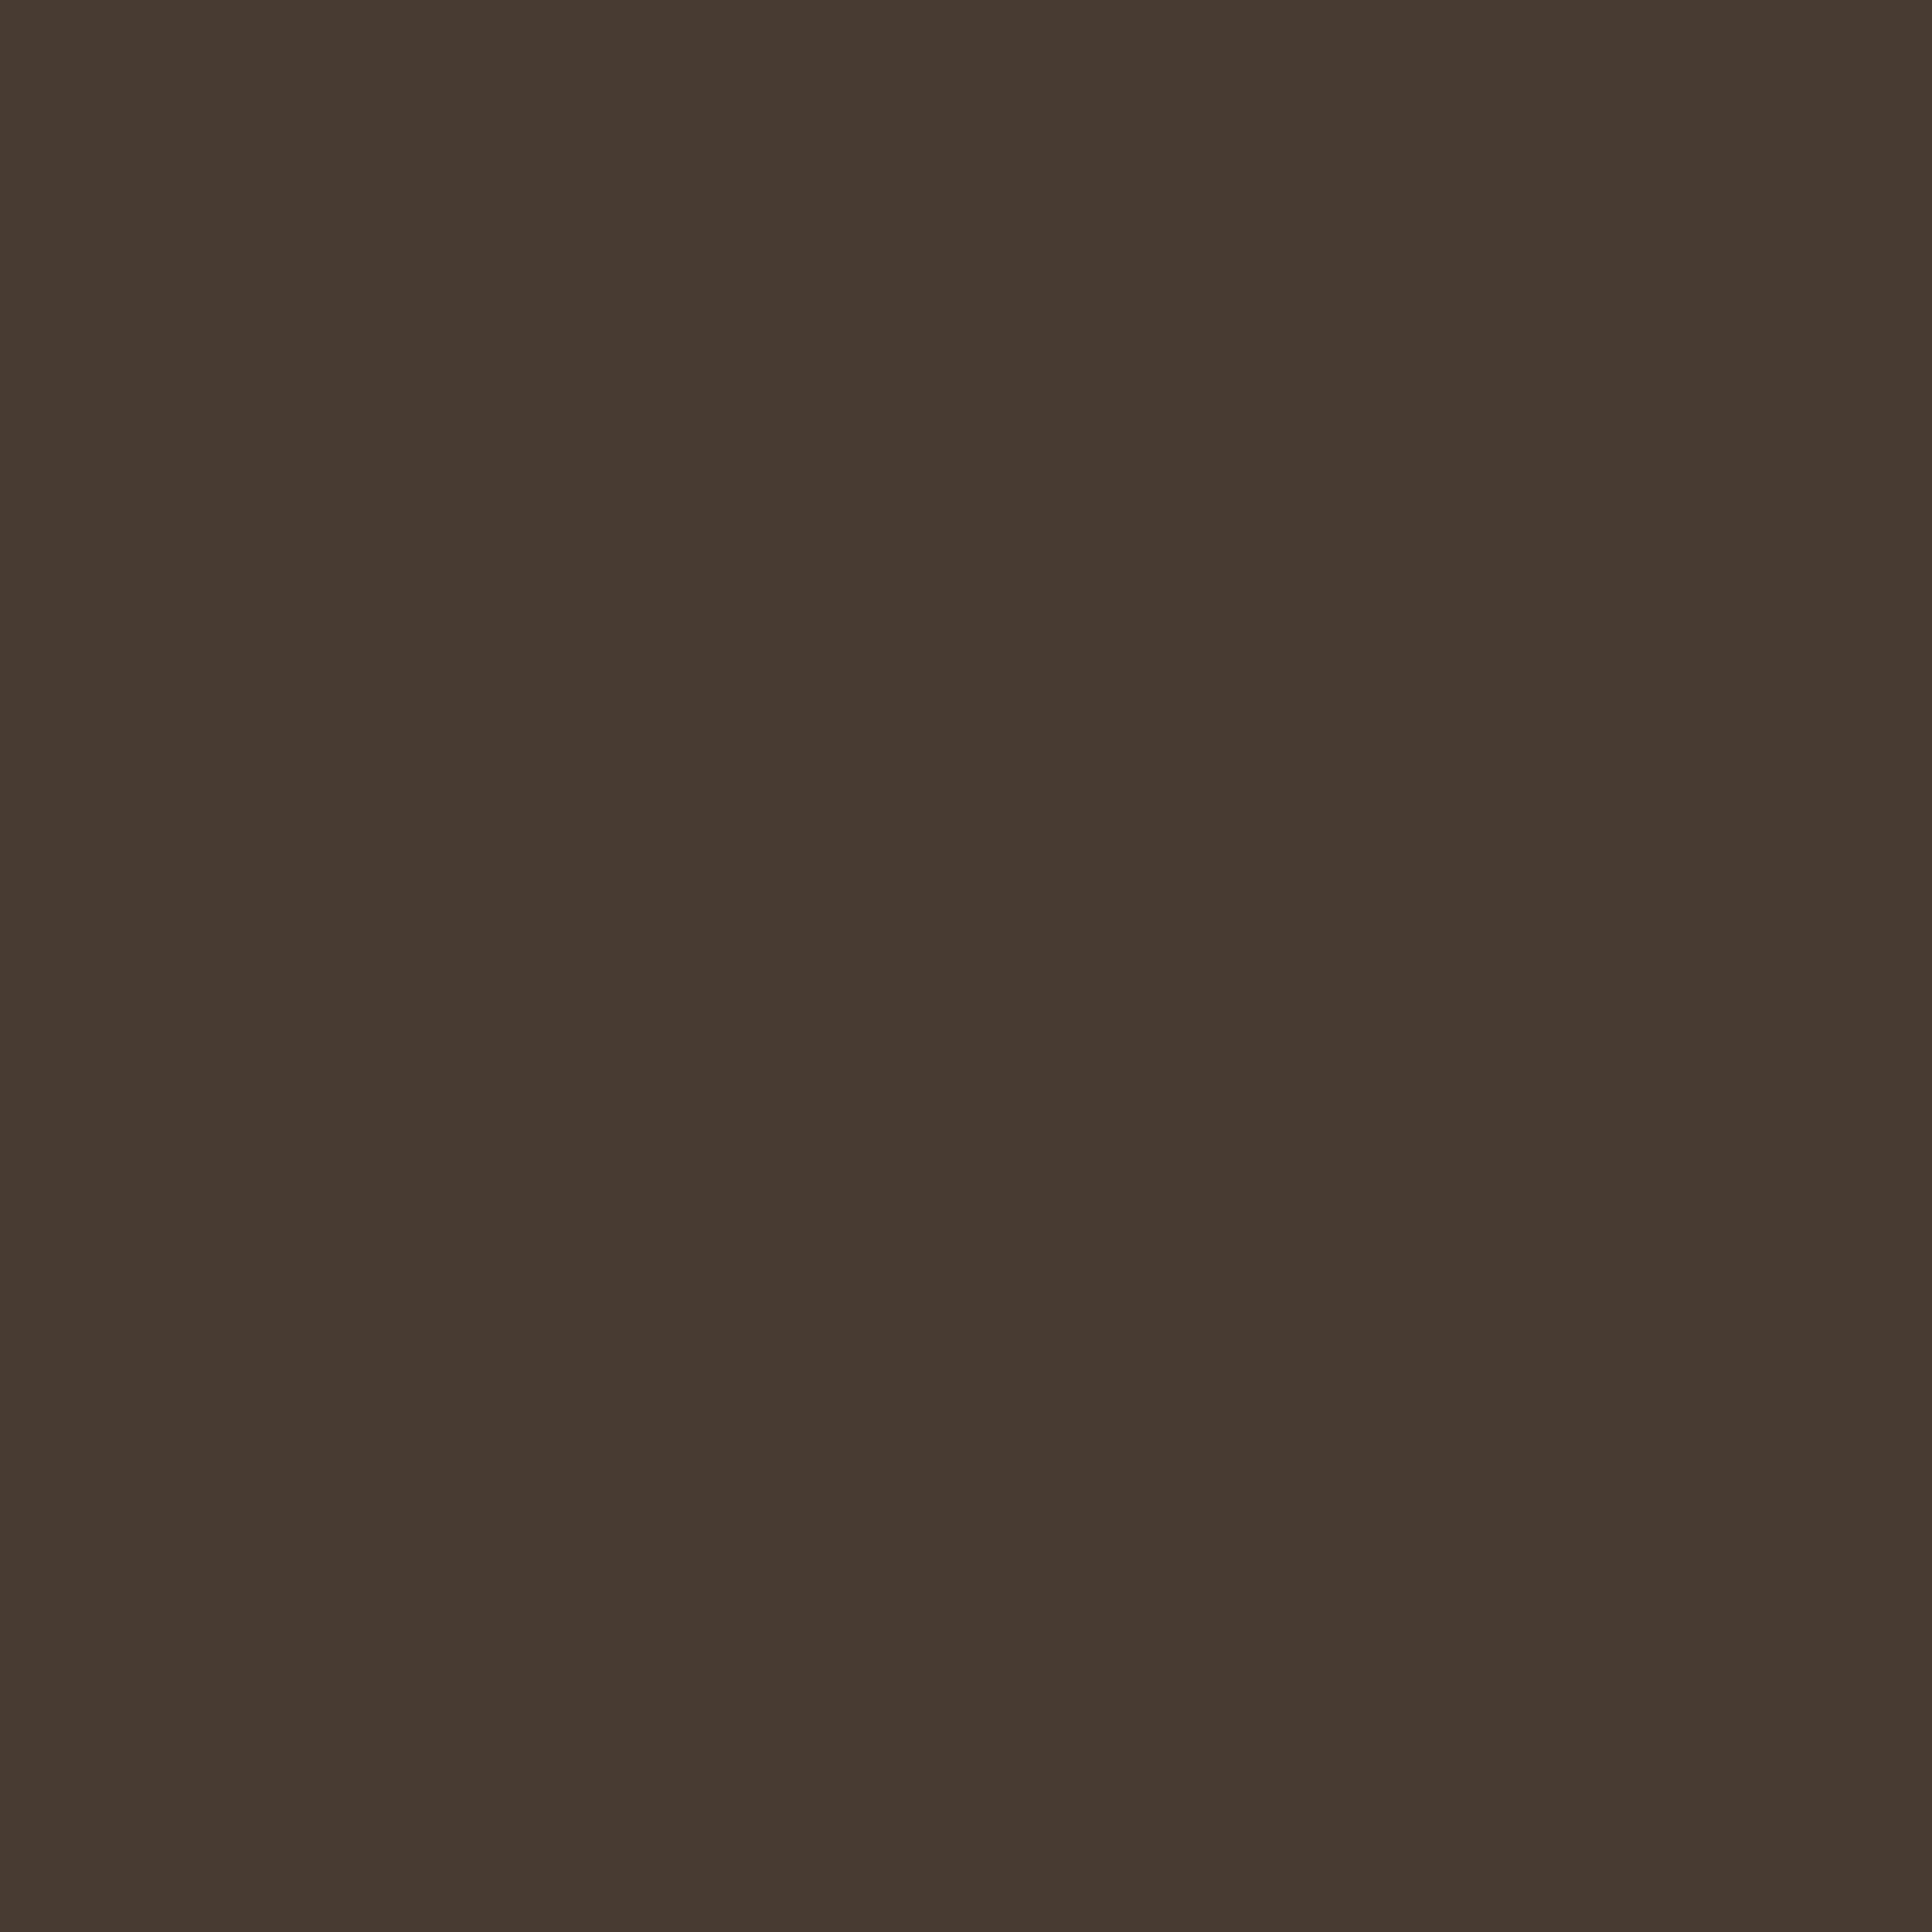 2732x2732 Taupe Solid Color Background